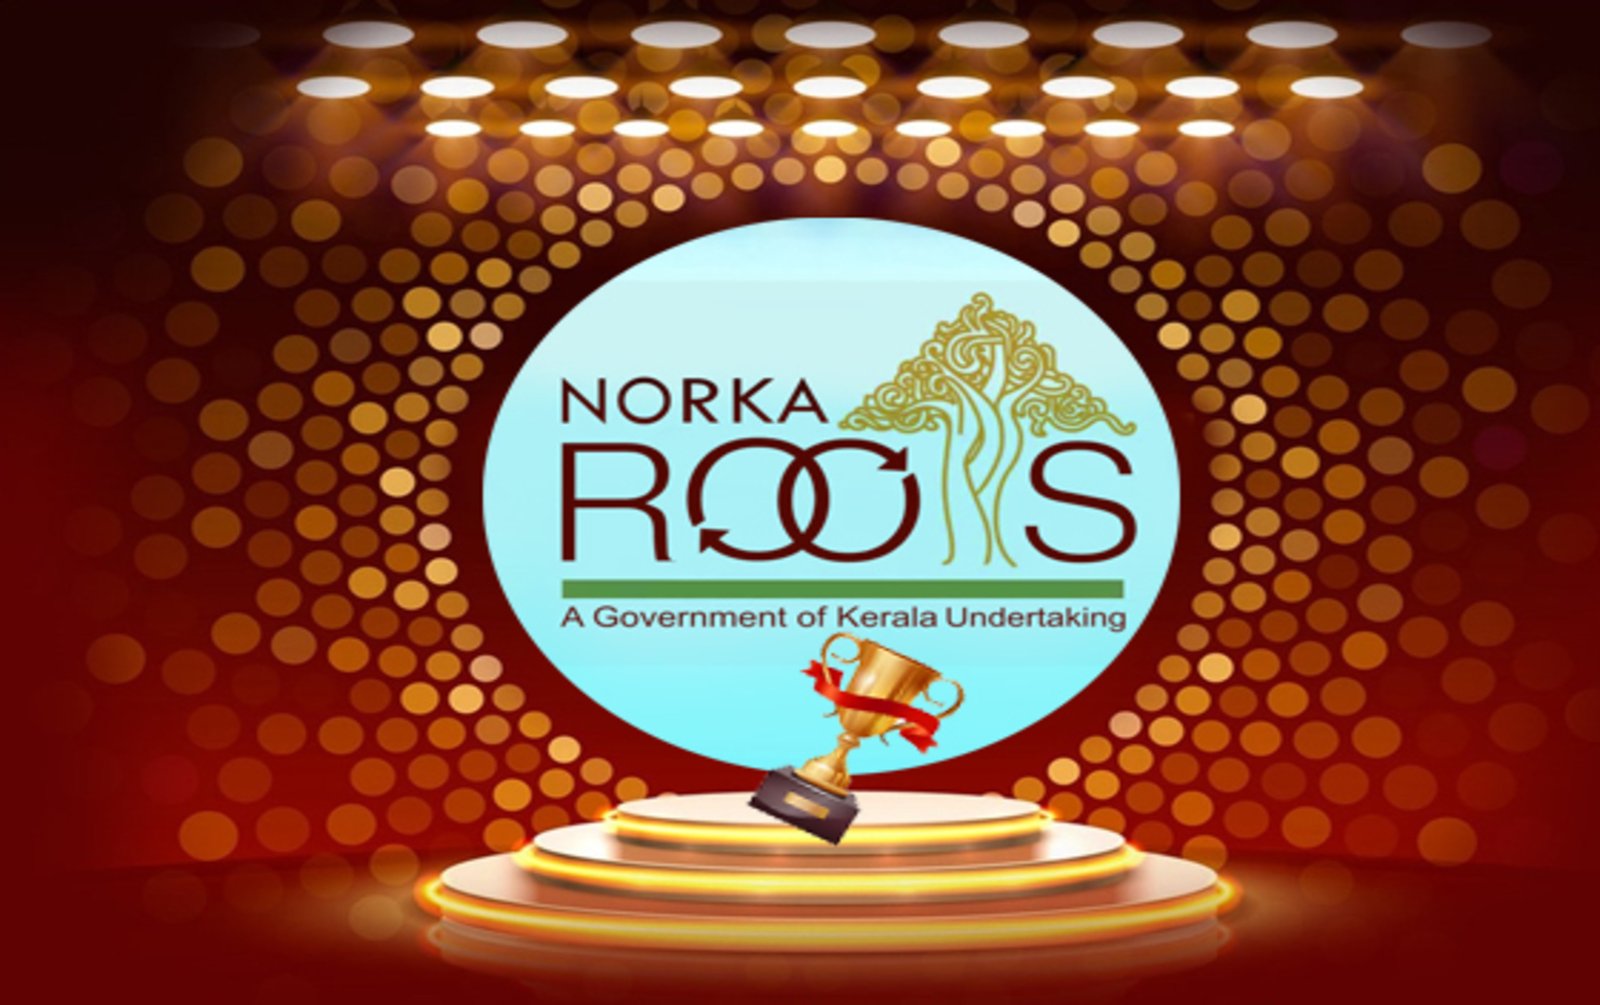 Excellence in Expatriate Welfare Development; National recognition for Norca Roots